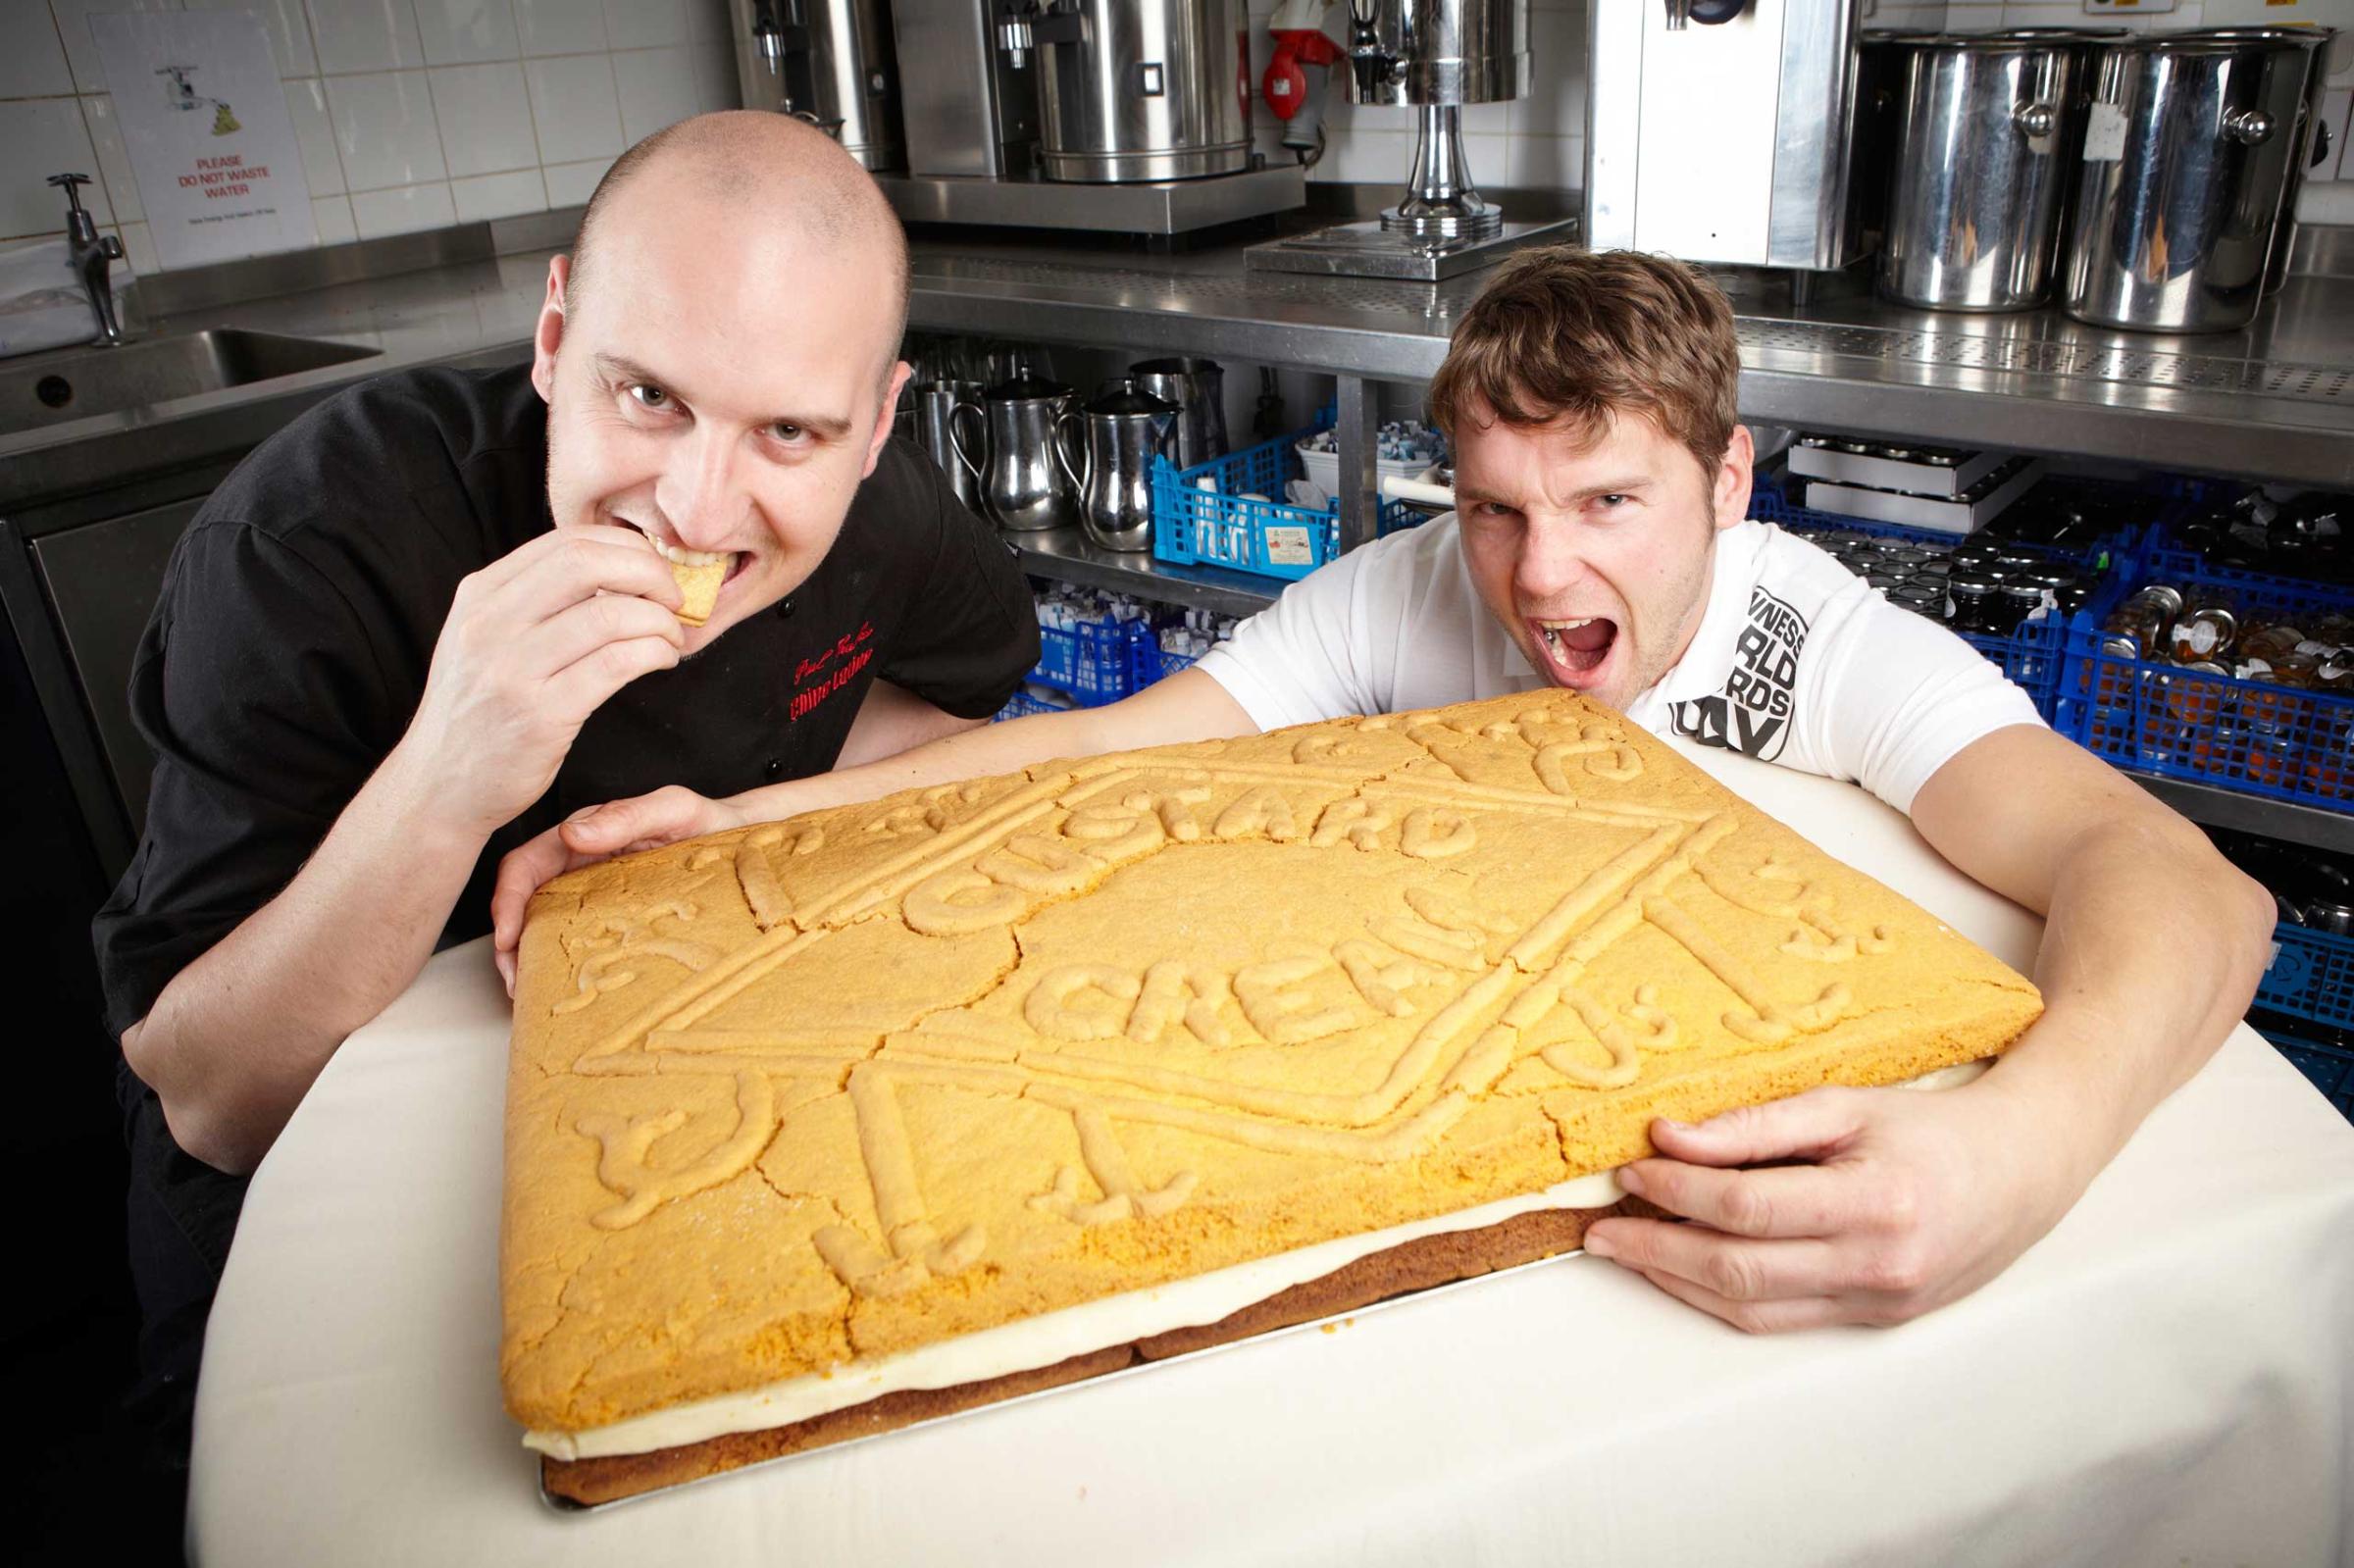 The largest (Custard) Cream Biscuit is 59 cm long and 39cm wide completely edible achieved by Simon Morgan & Paul Thacker raising money for Children in Need achieved on 18 November 2010 on Guinness World Records Day. Photo Credit: Paul Michael Hughes/Guinness World Records